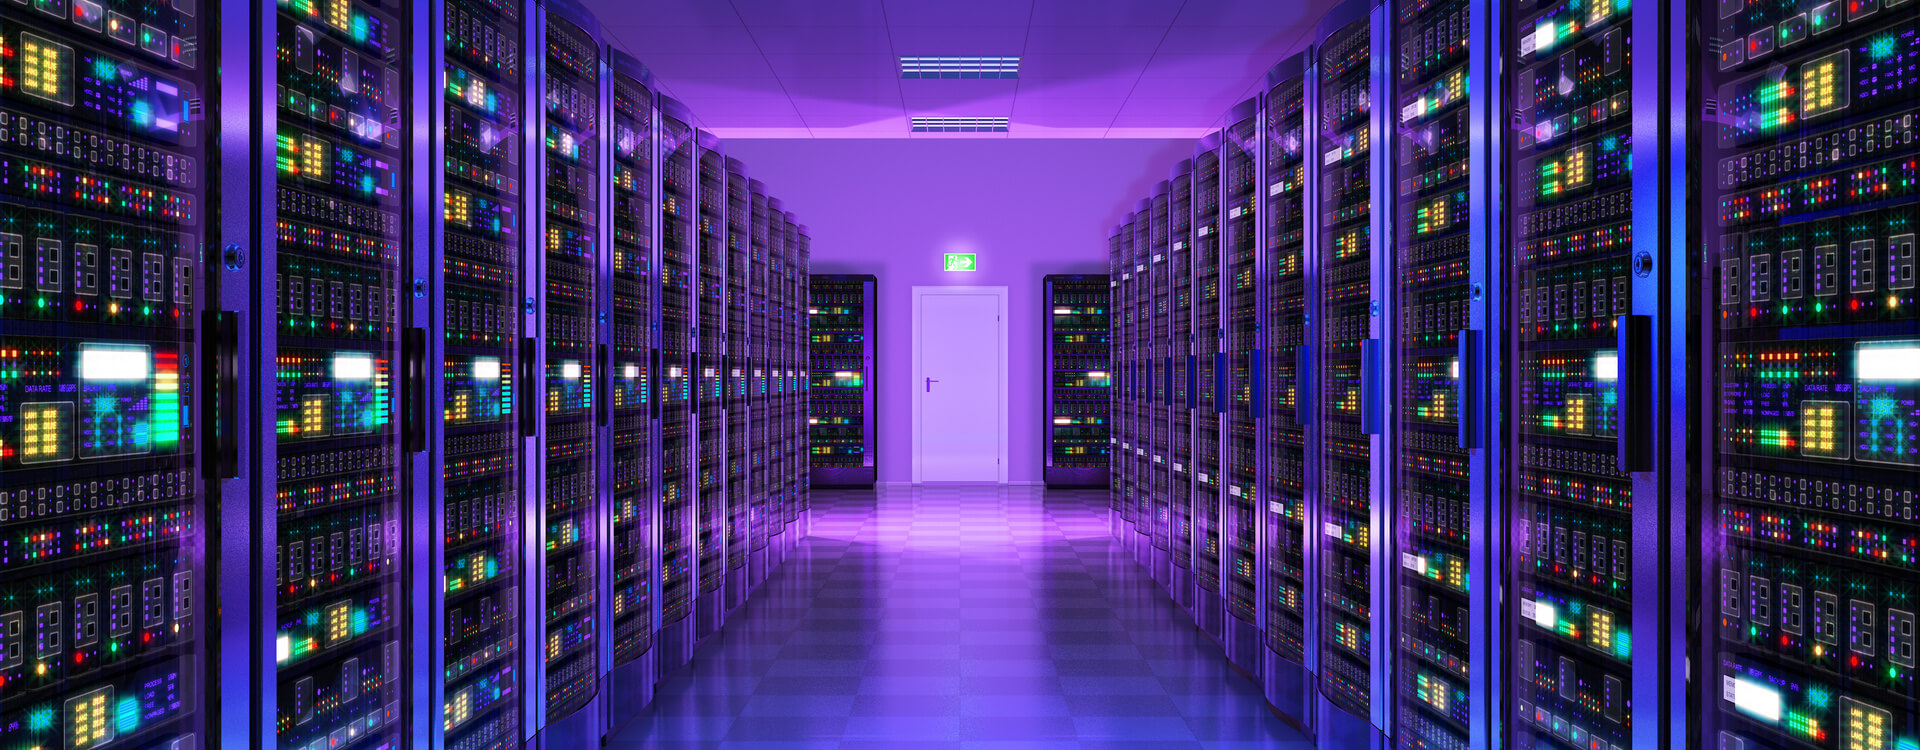 Always on: ULB provides end-to-end load testing solutions for data centers.